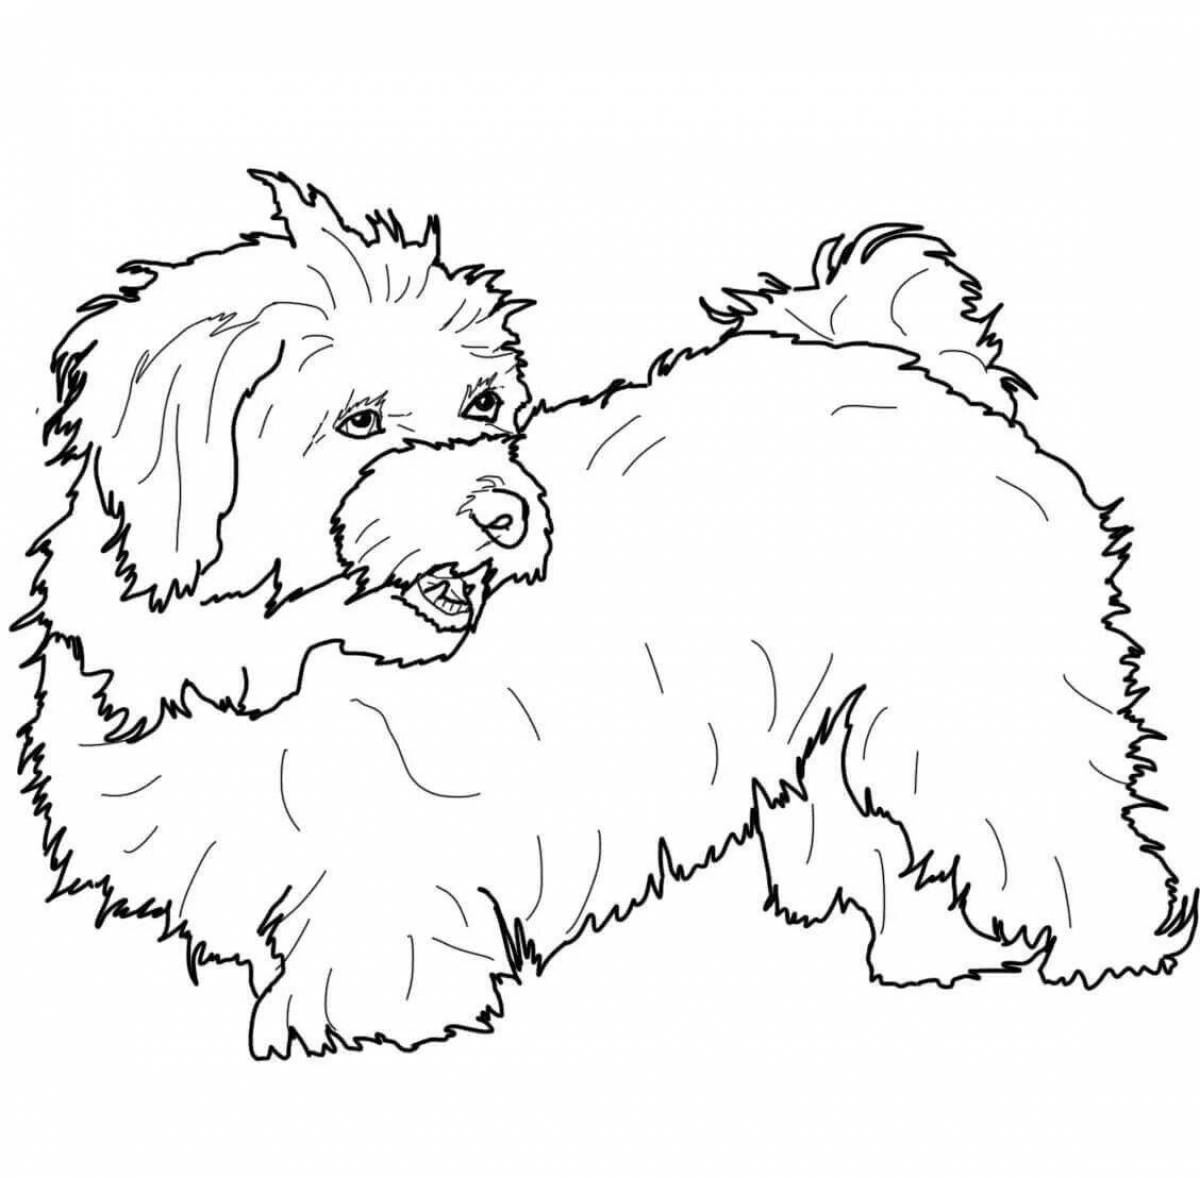 Brave coloring pages of dogs of different breeds